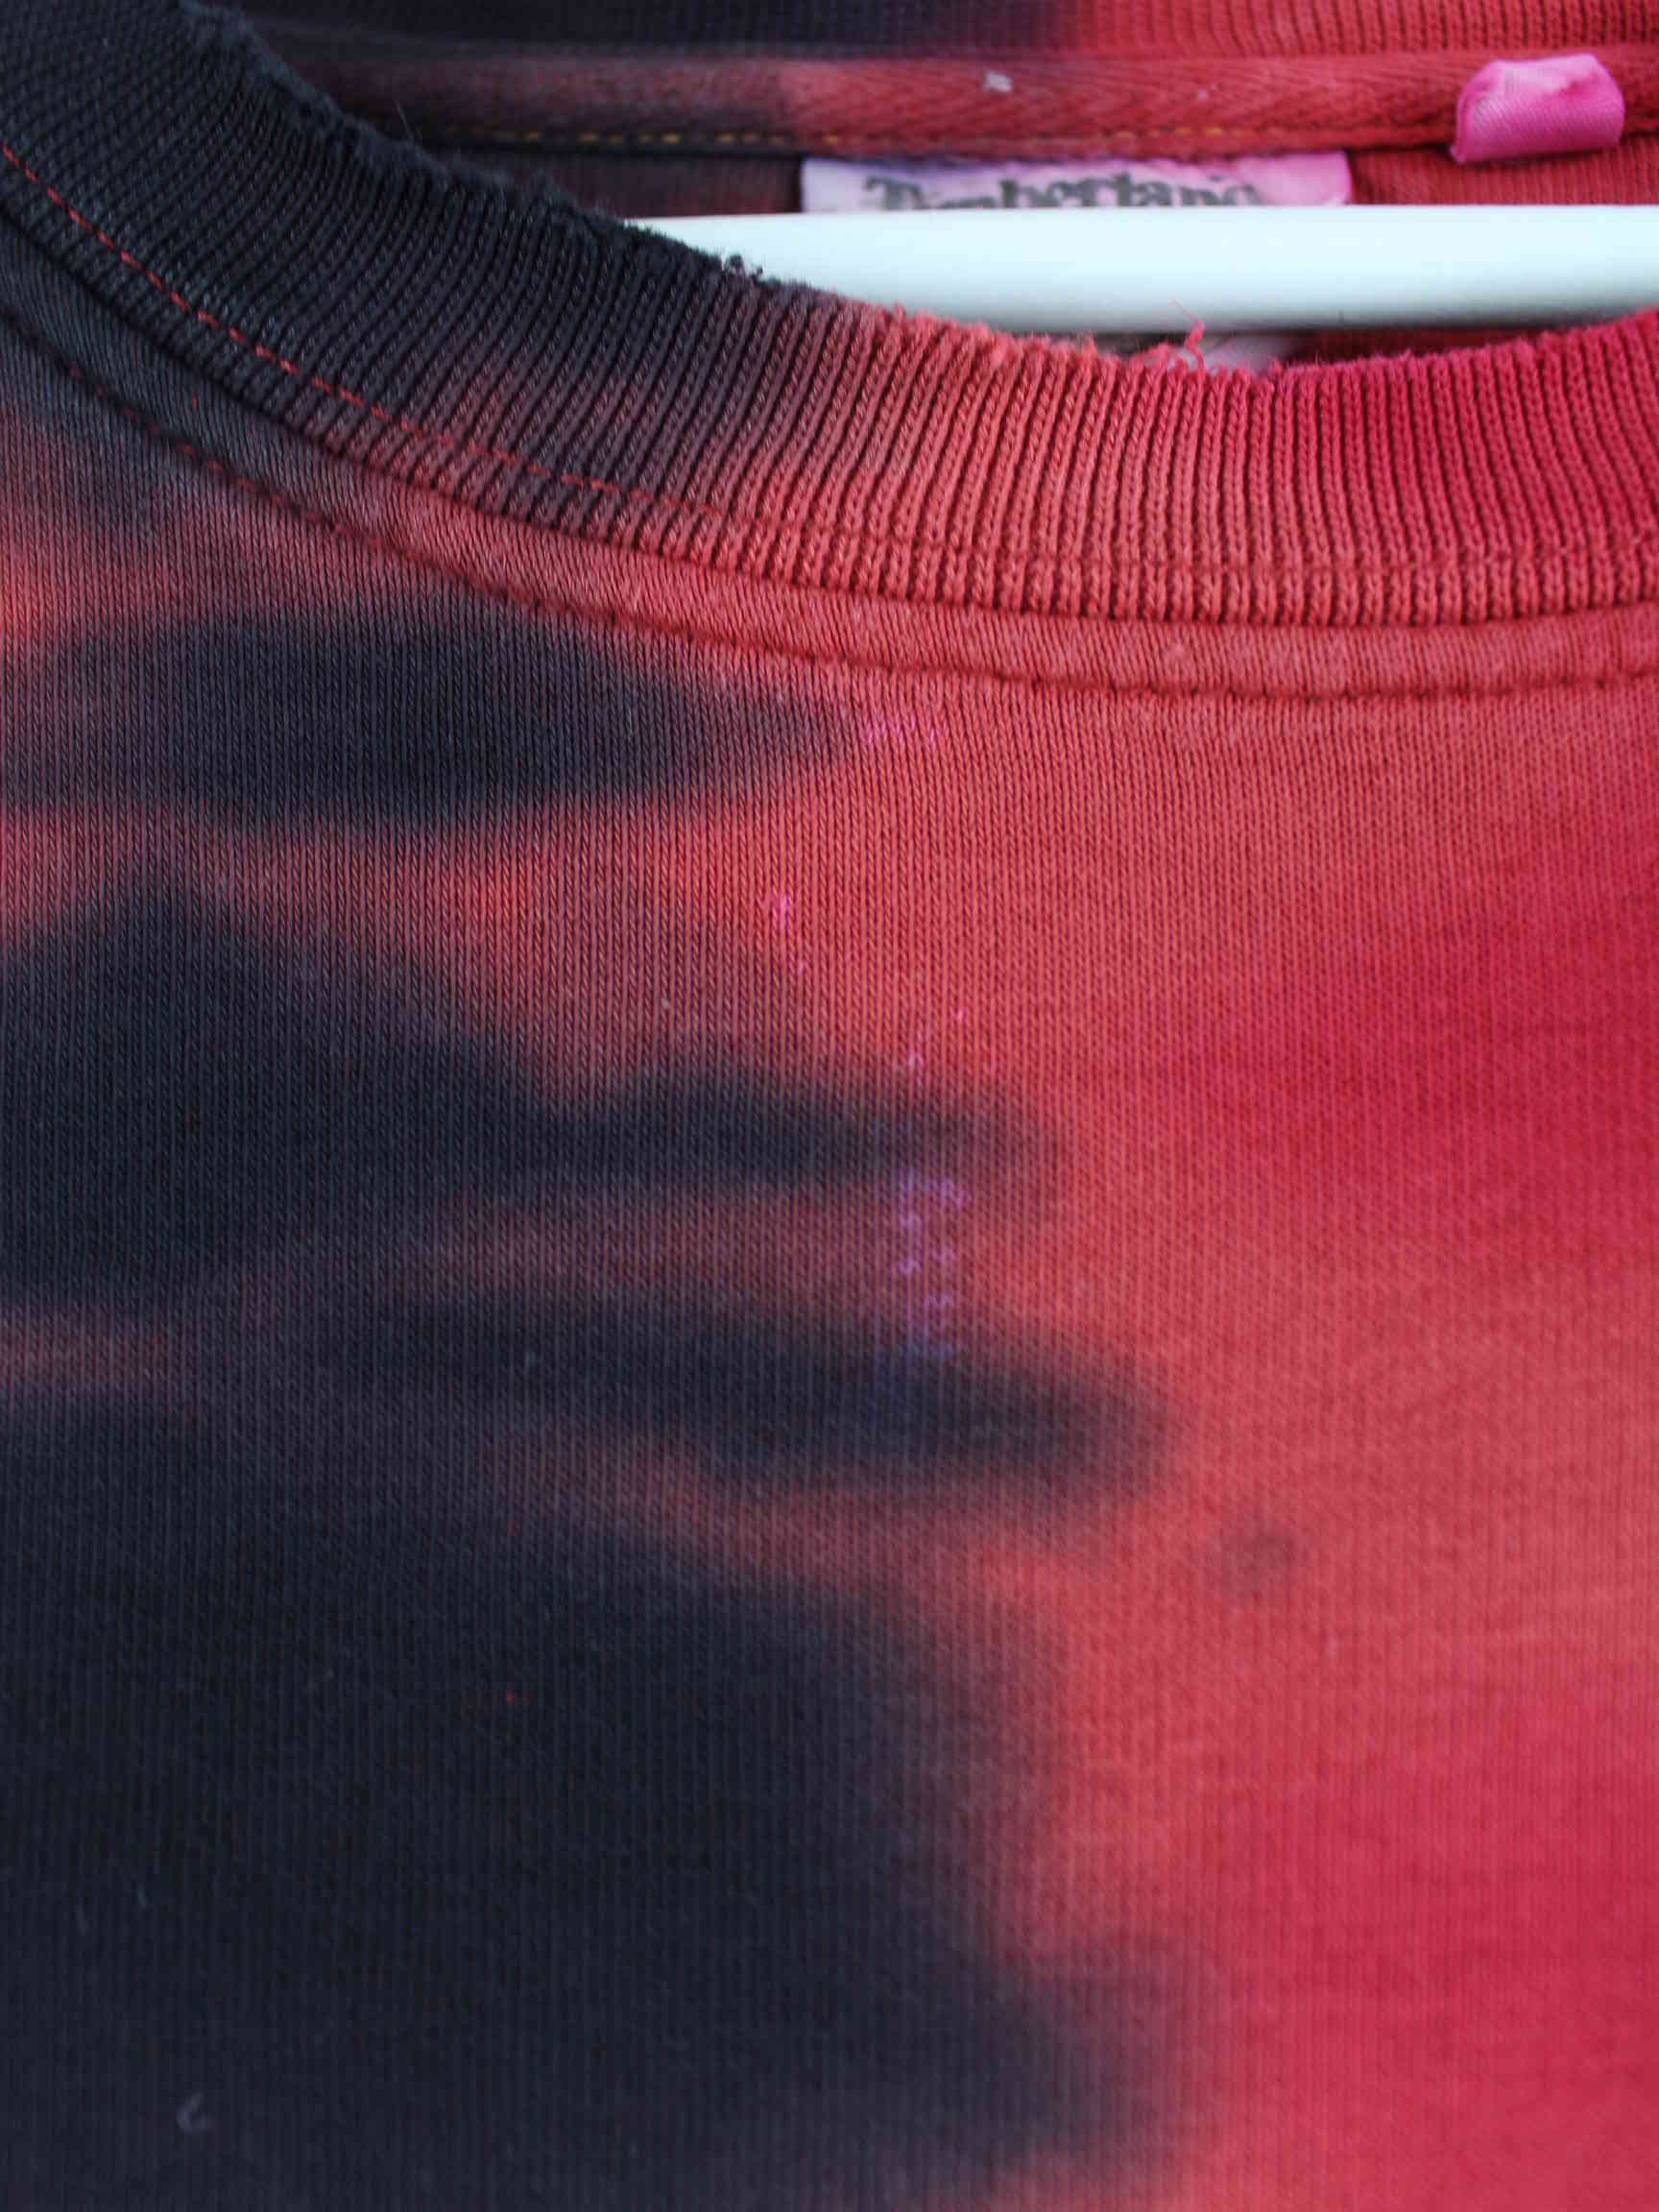 Timberland 90s Vintage Embroidered Tie Dye Sweater Rot XL (detail image 7)